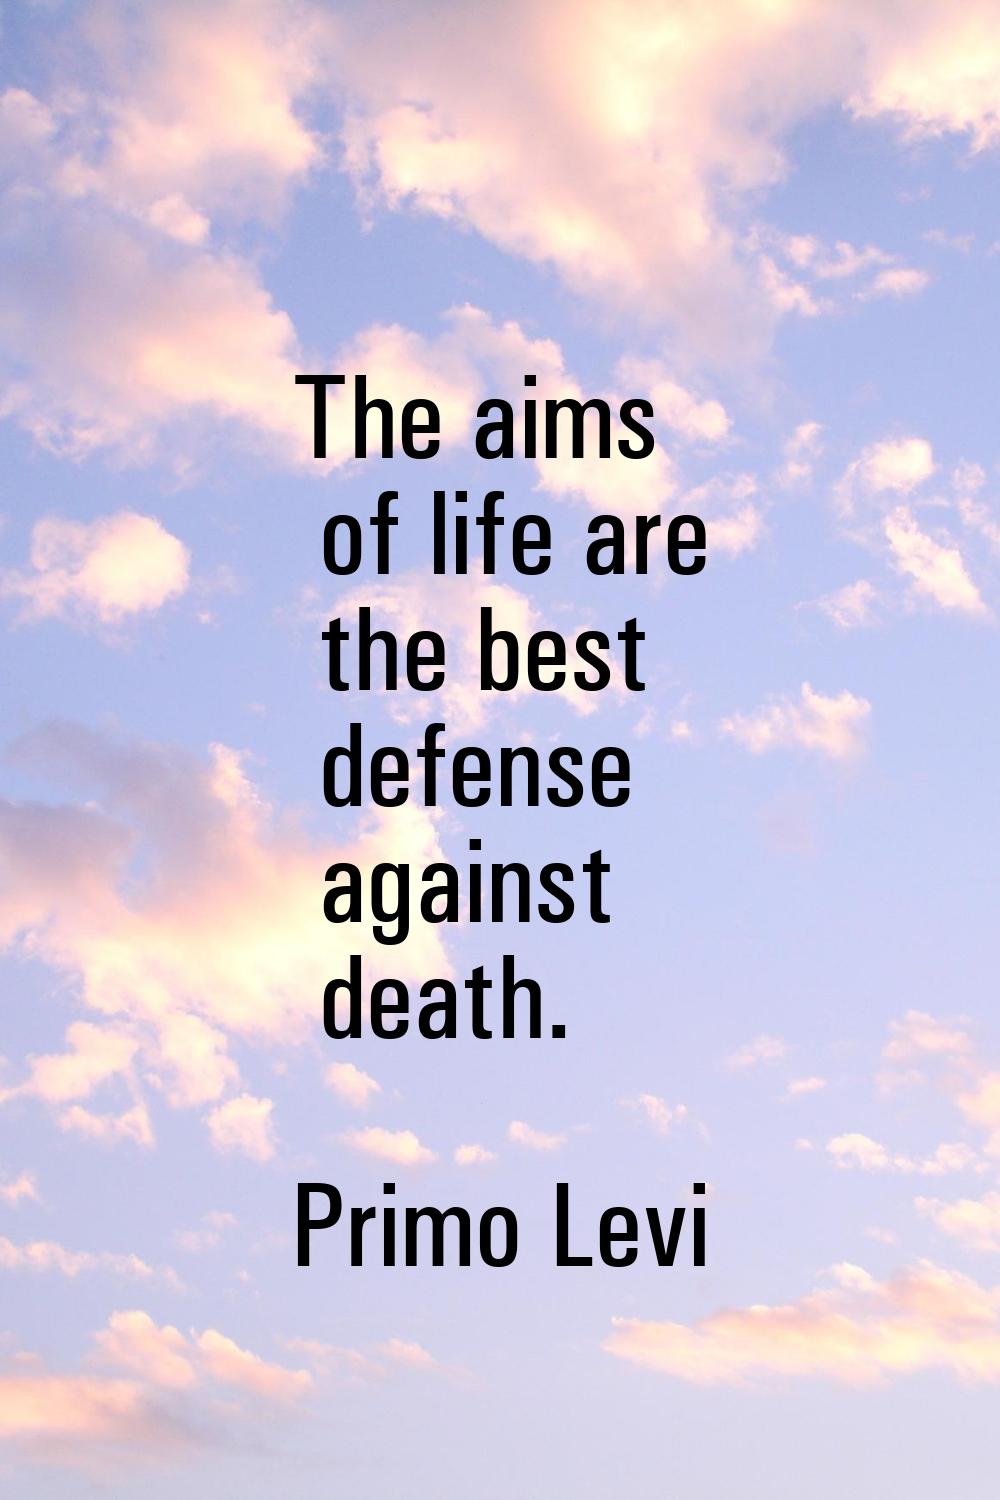 The aims of life are the best defense against death.